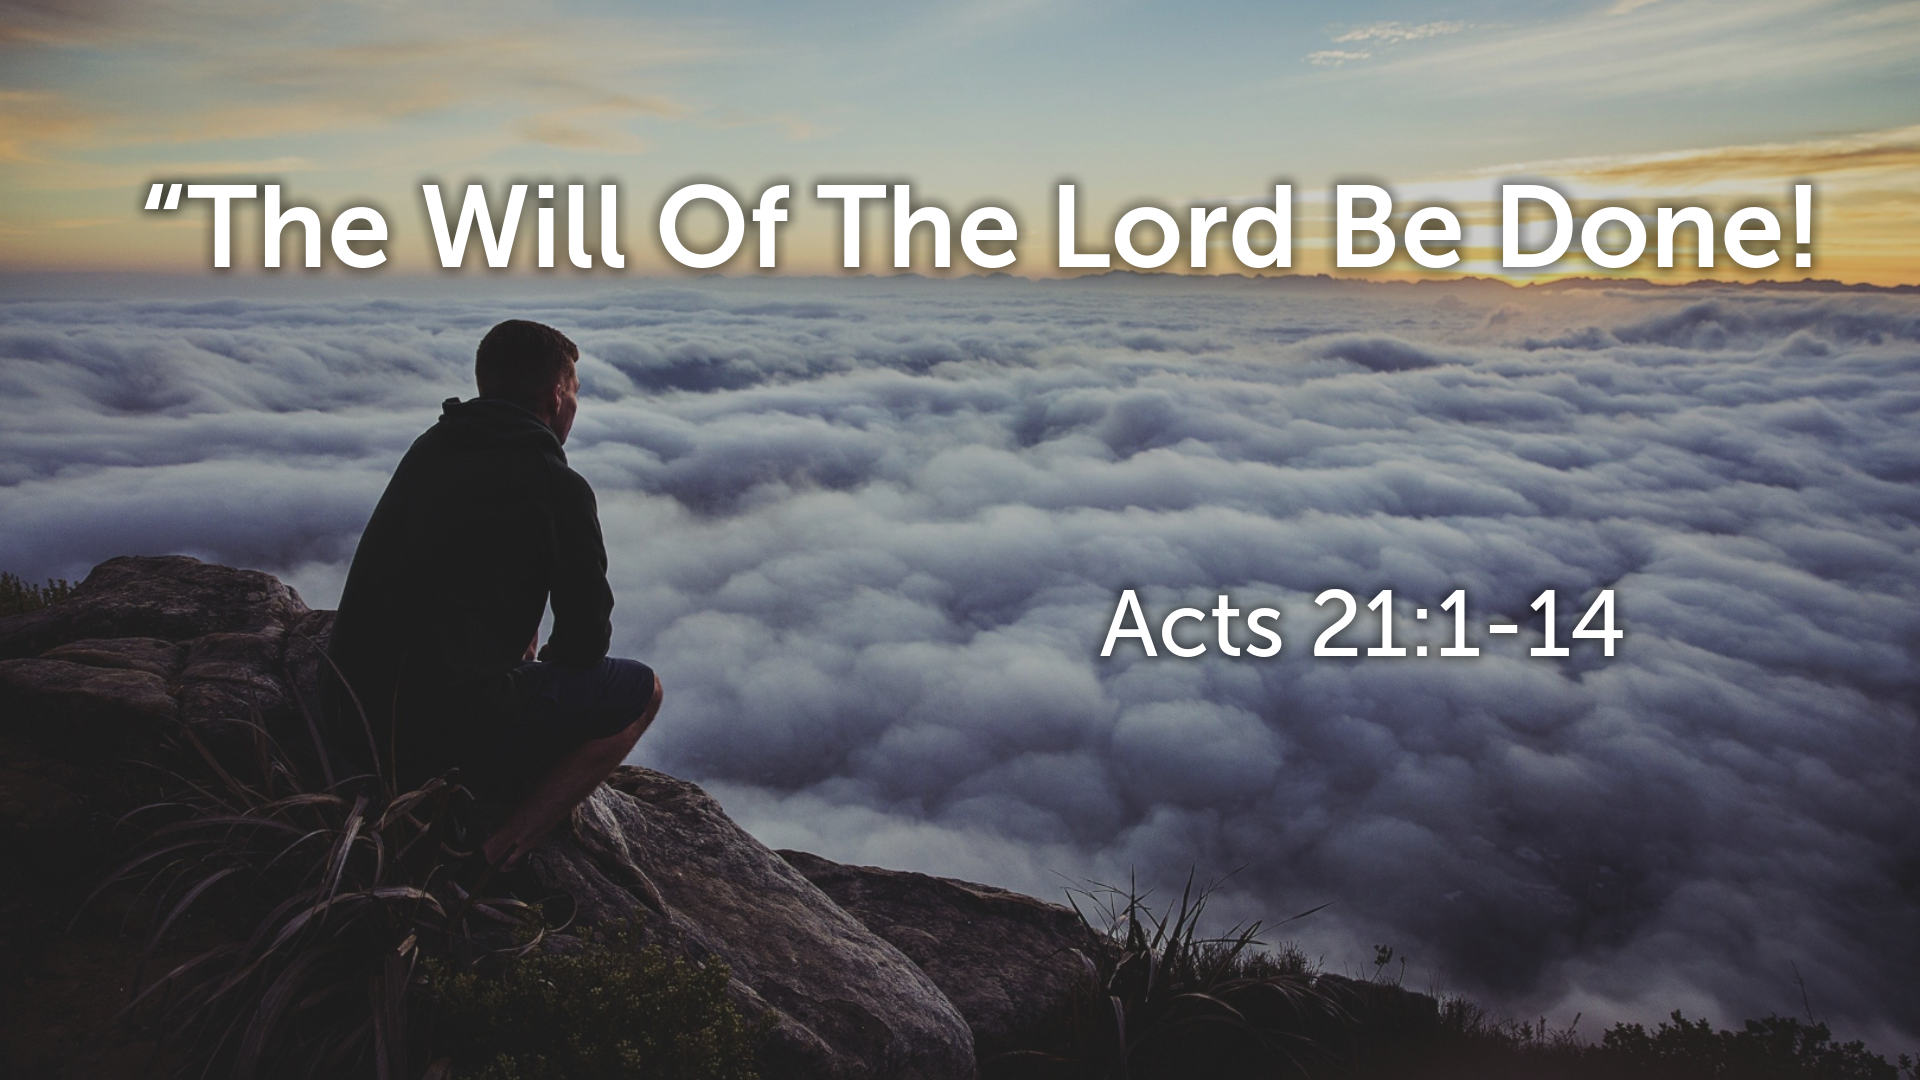 “The Will Of The Lord Be Done!”